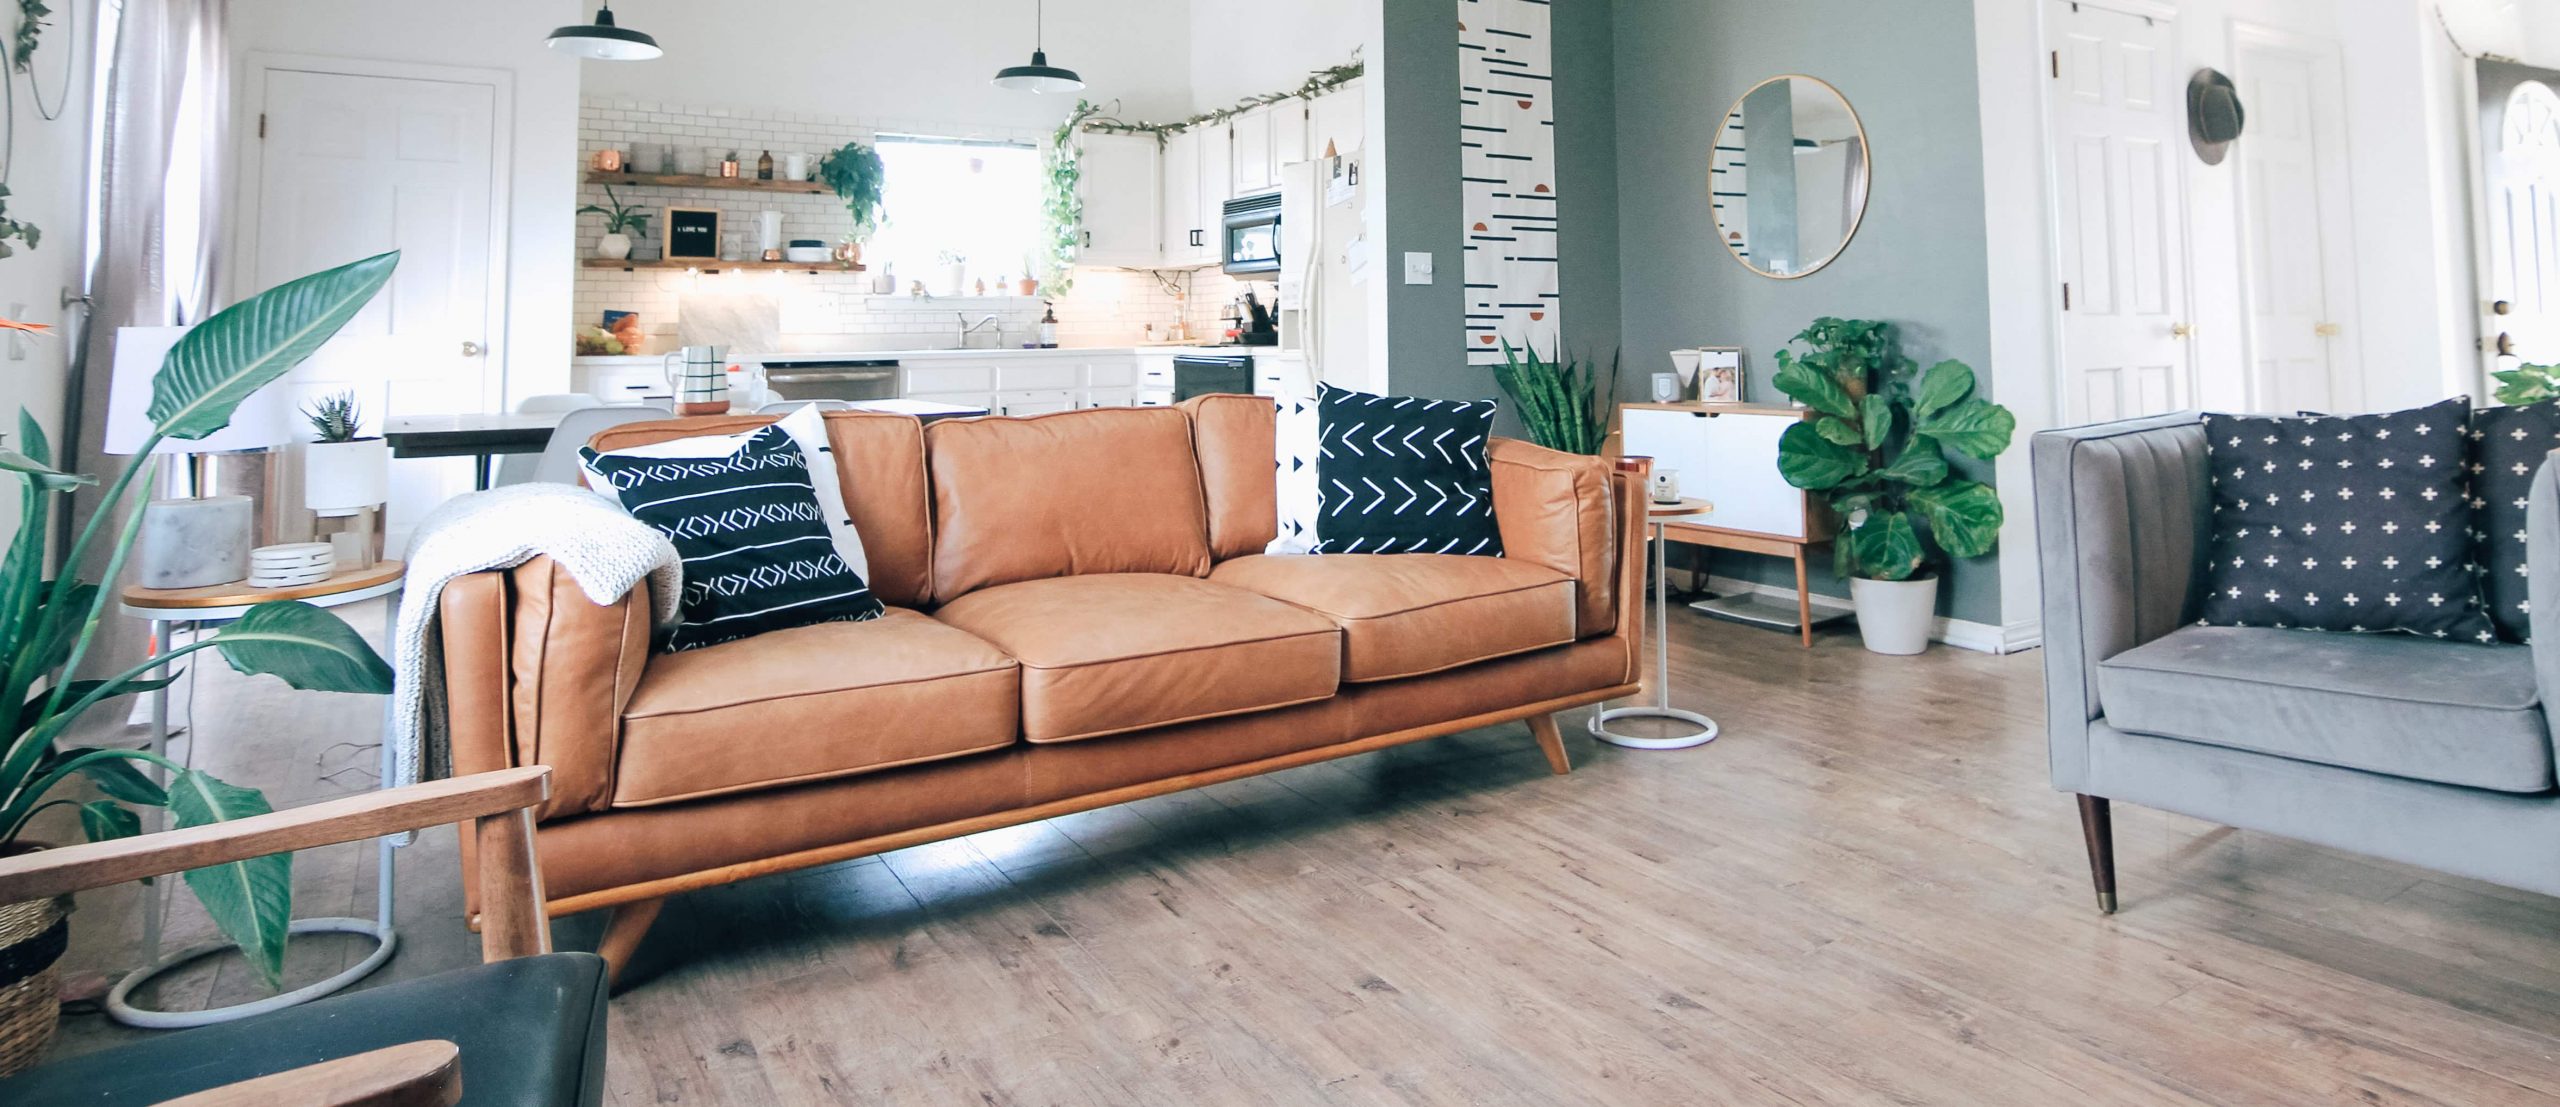 Design  or revamp your living room in style & newness with modern sofas